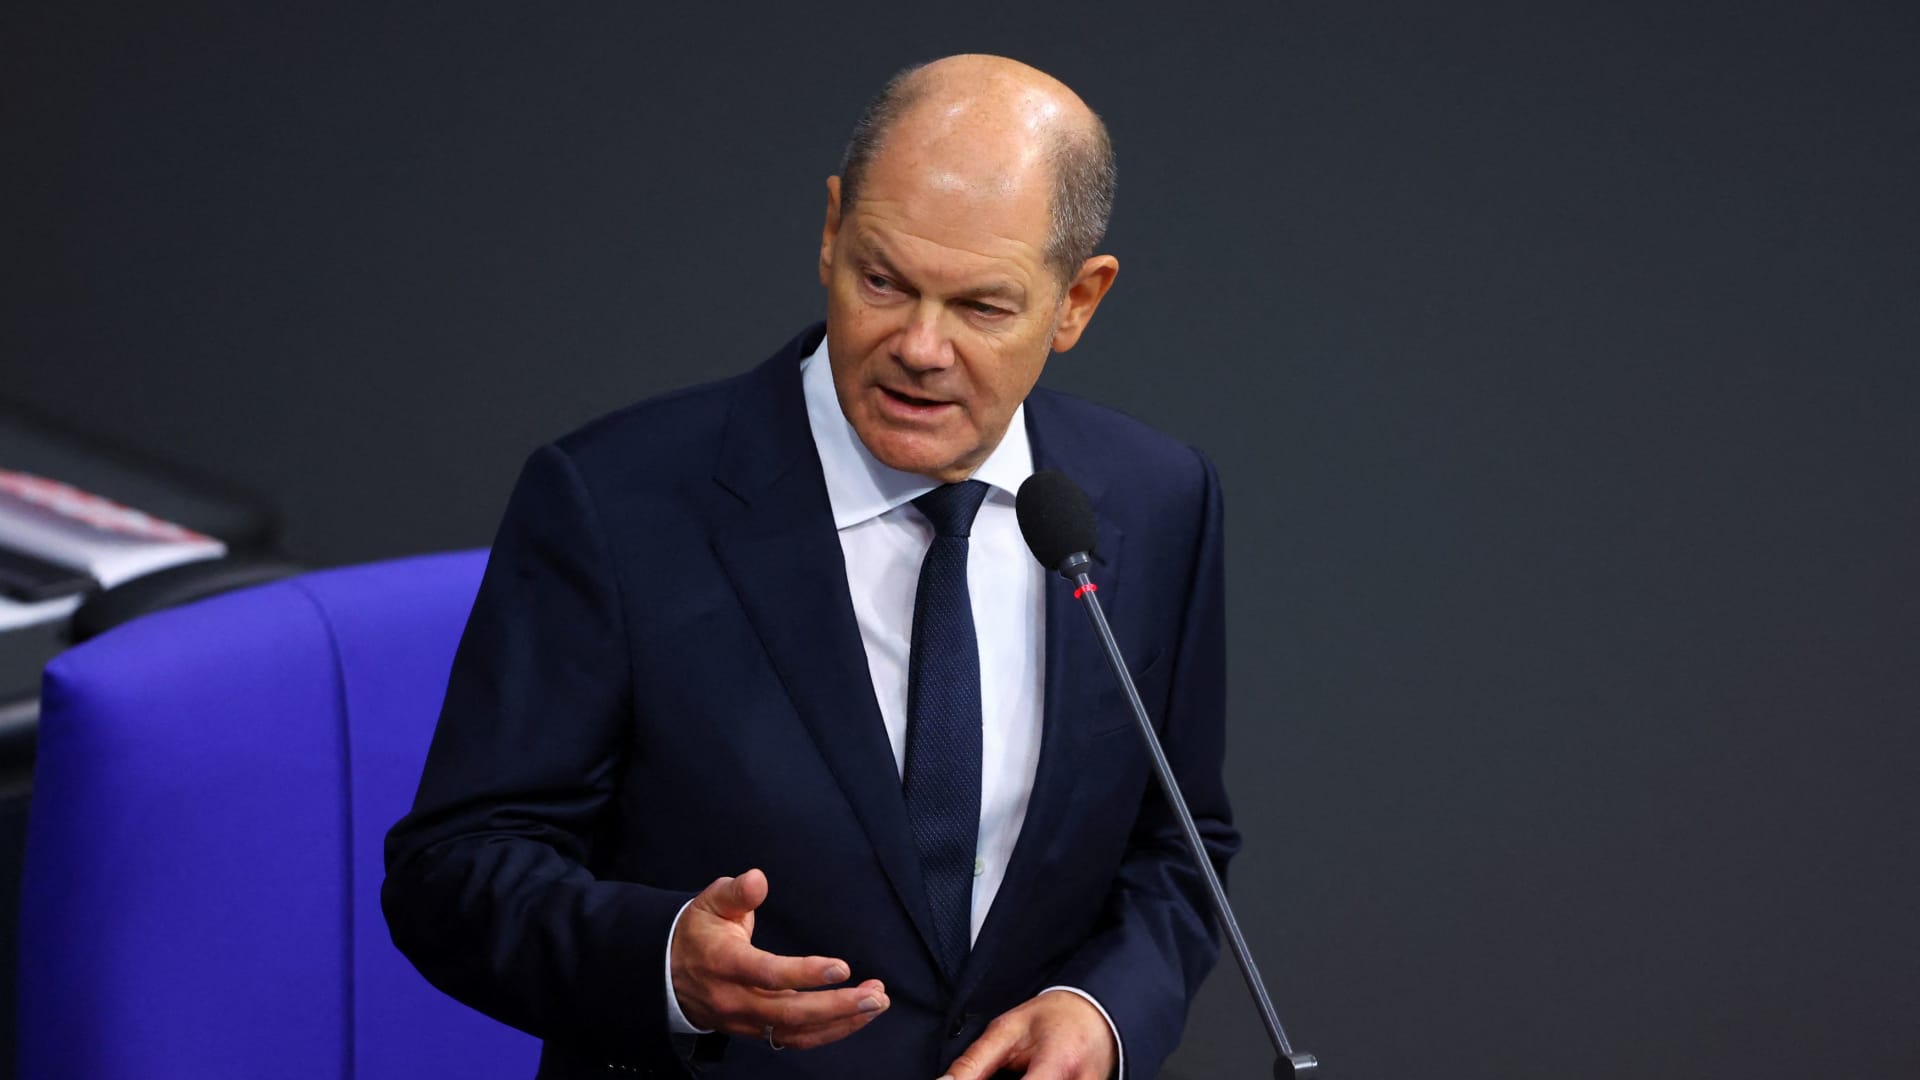 German Chancellor Olaf Scholz addresses the lower house of parliament Bundestag in Berlin on Jan. 25, 2023.